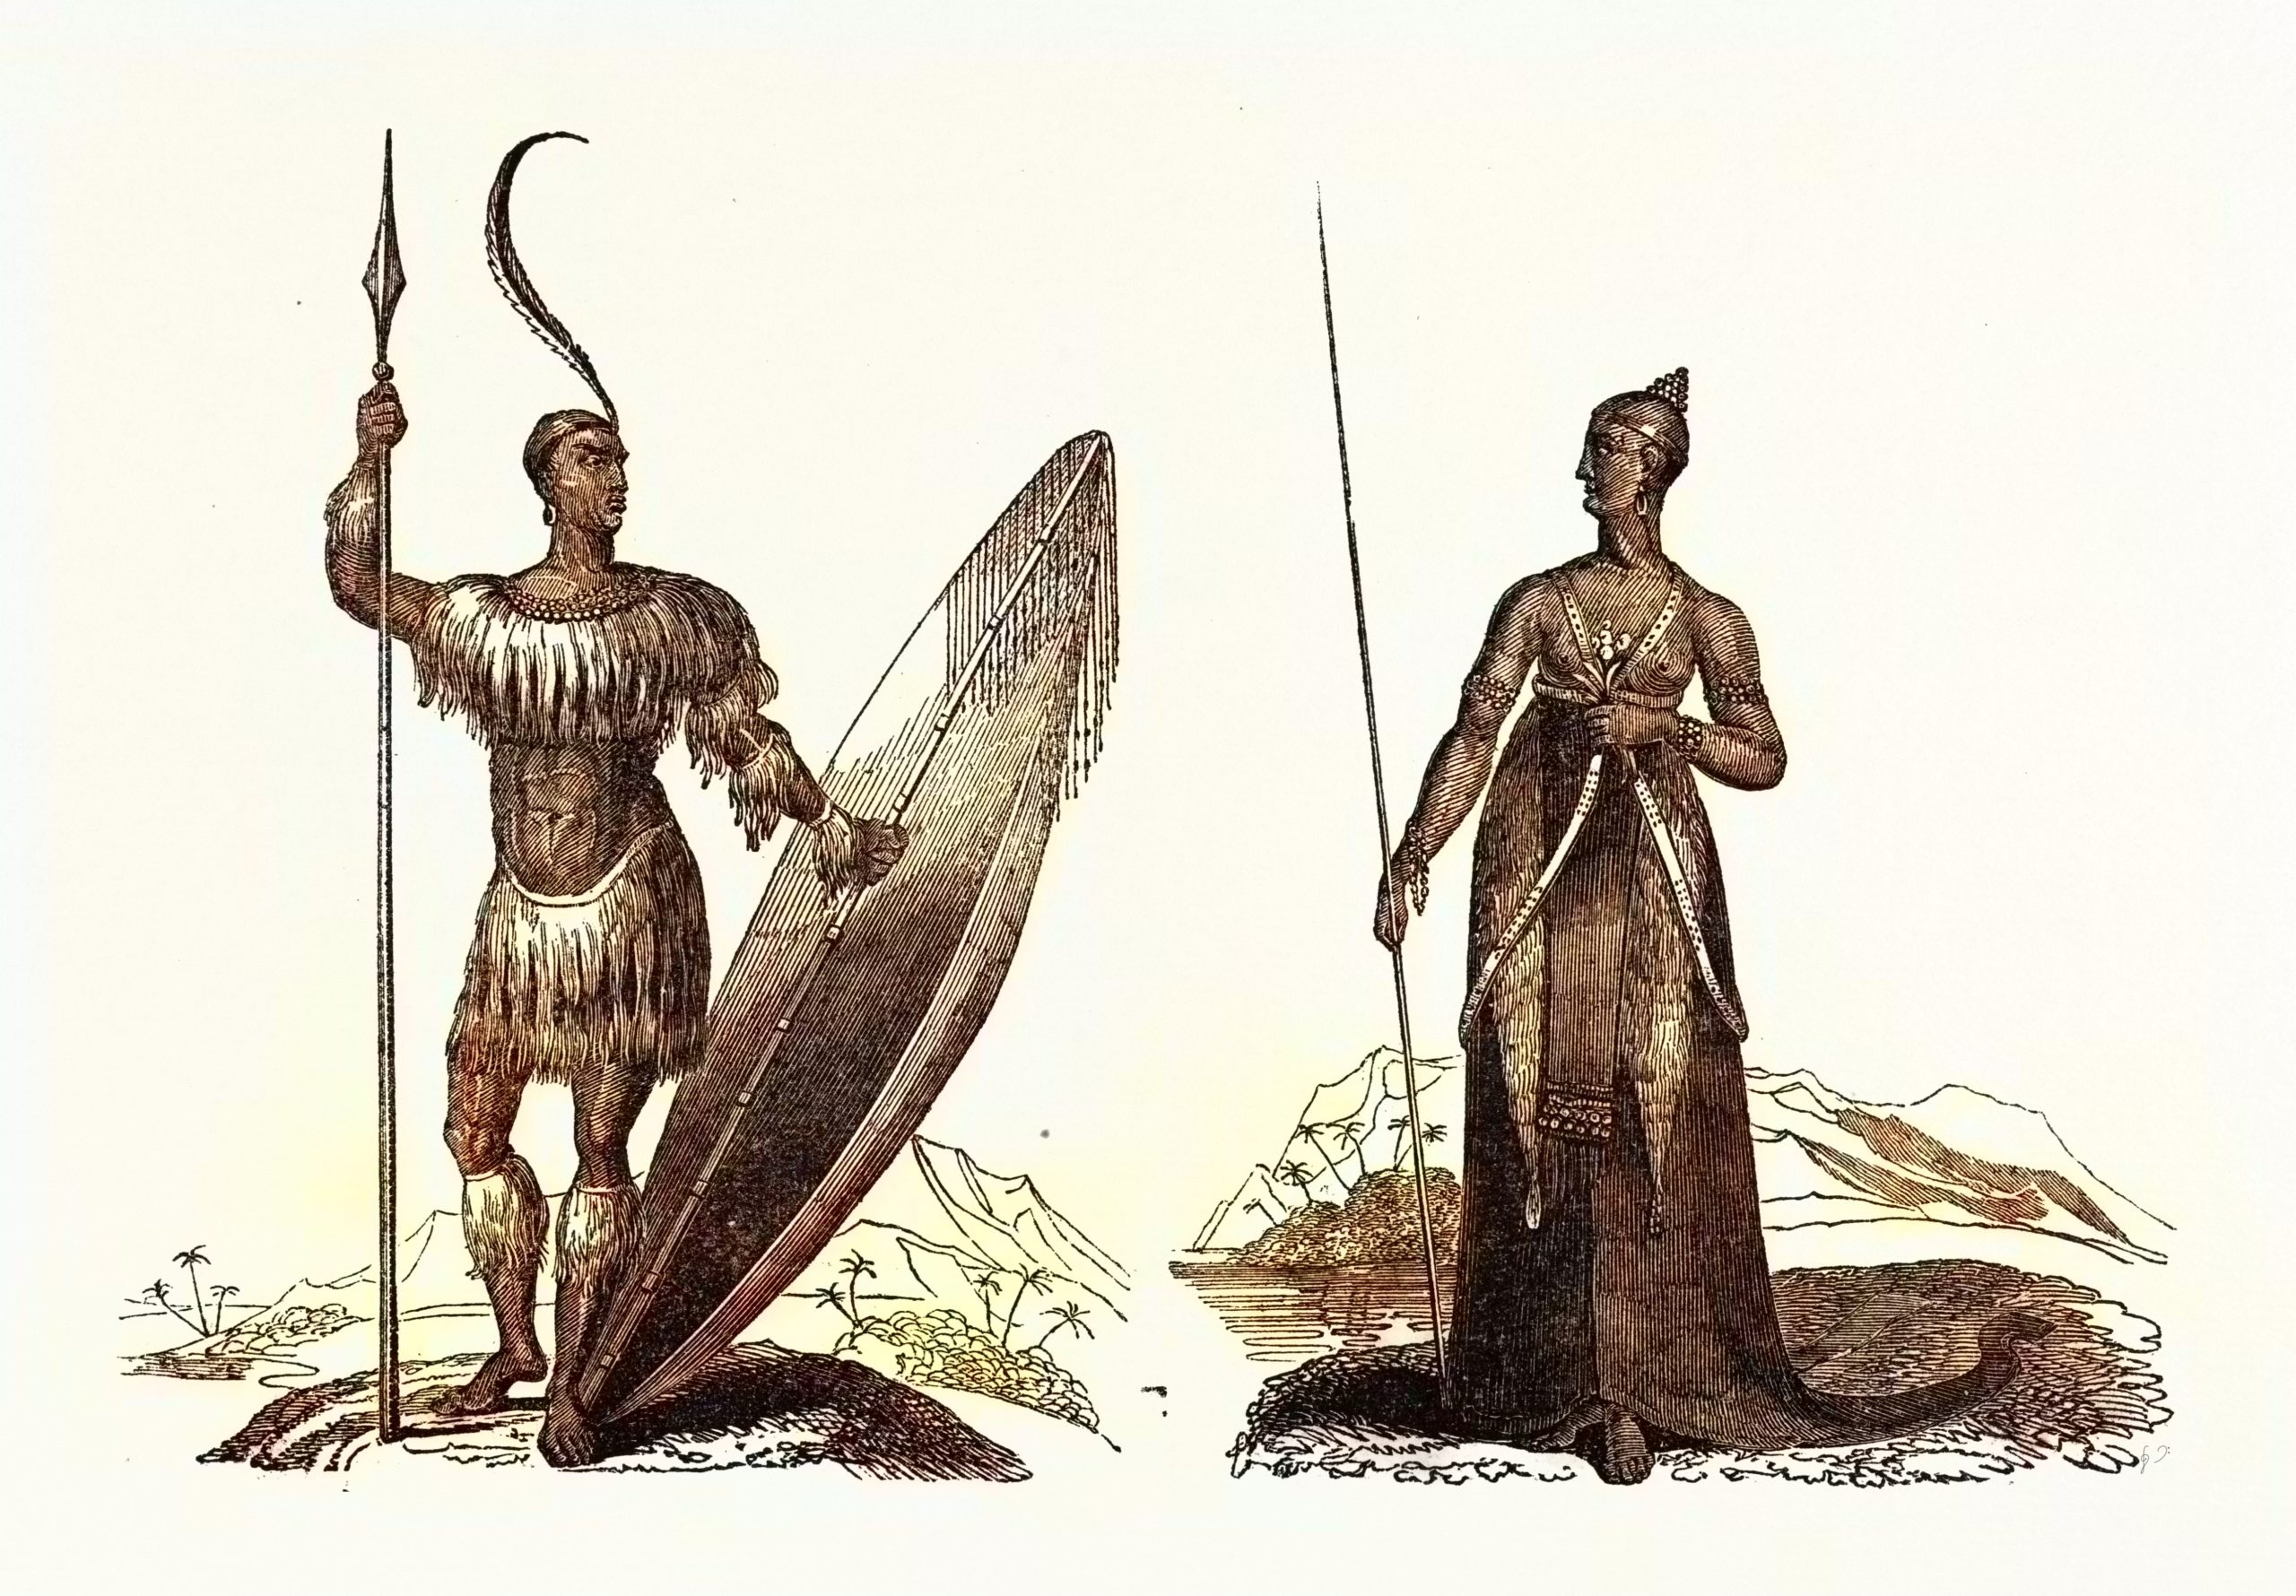 Zulu men demonstrating traditional fighting with sticks, Stock